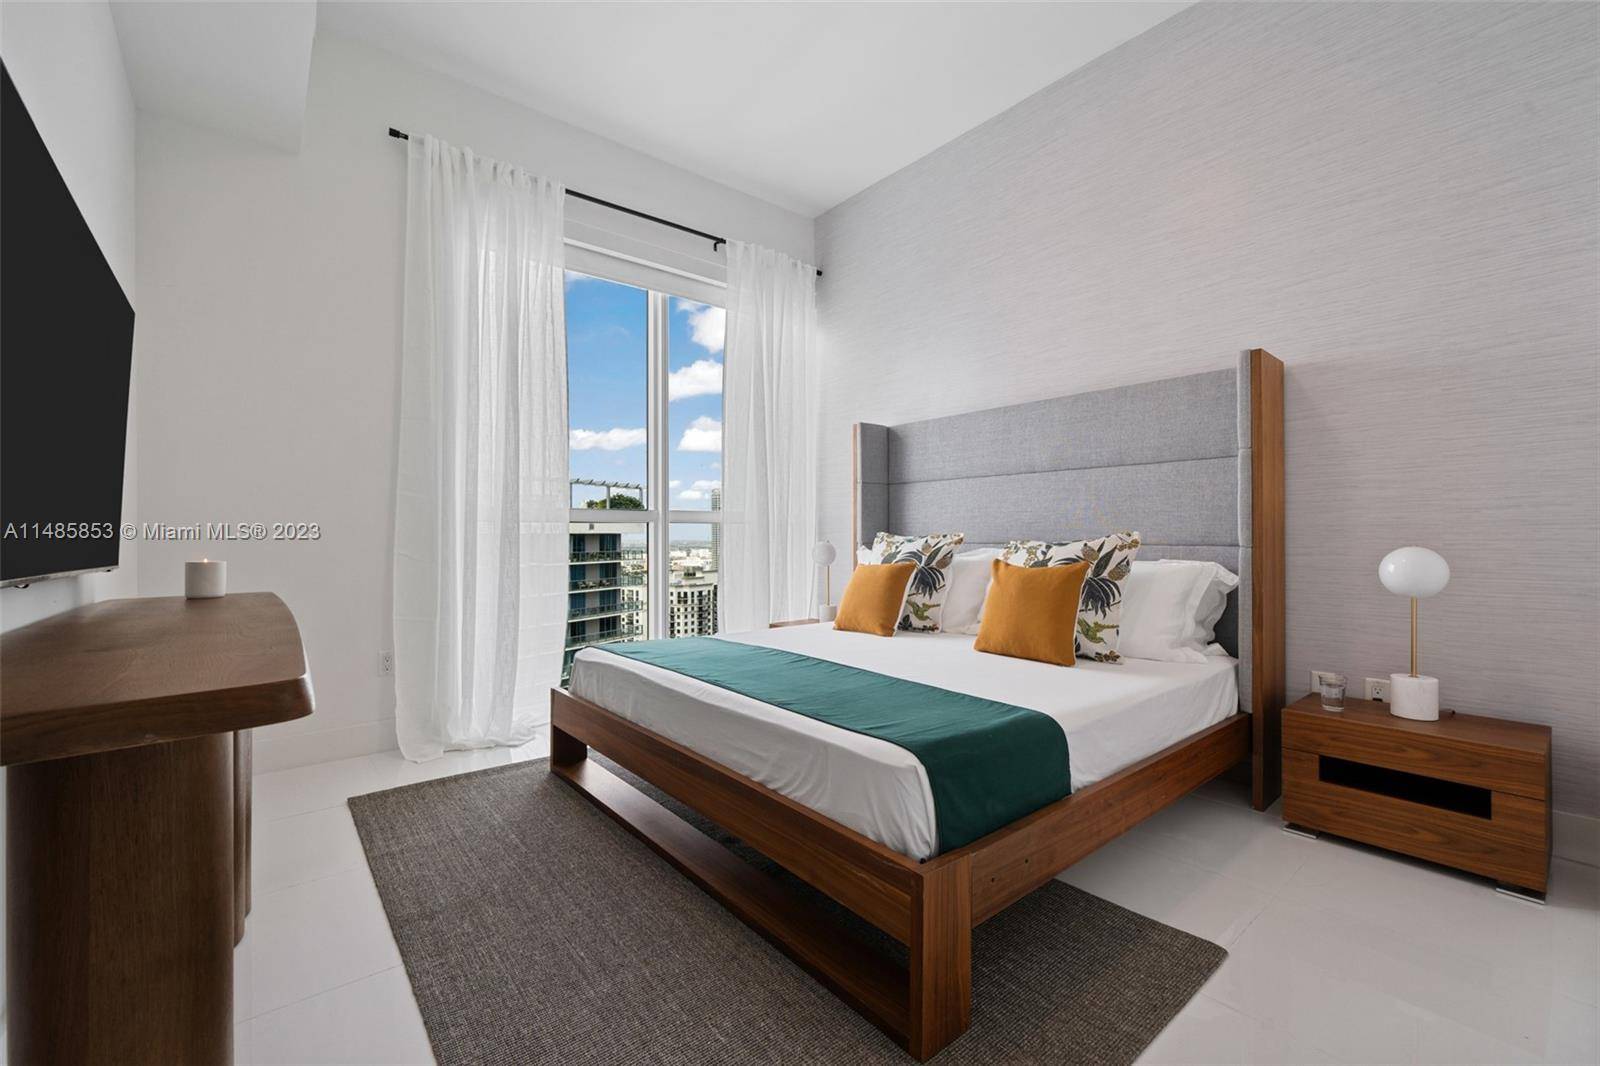 STUNNING FULLY FURNISHED 1 BED, 1 BATH PLUS DEN LOWER PH AT THE BOND.